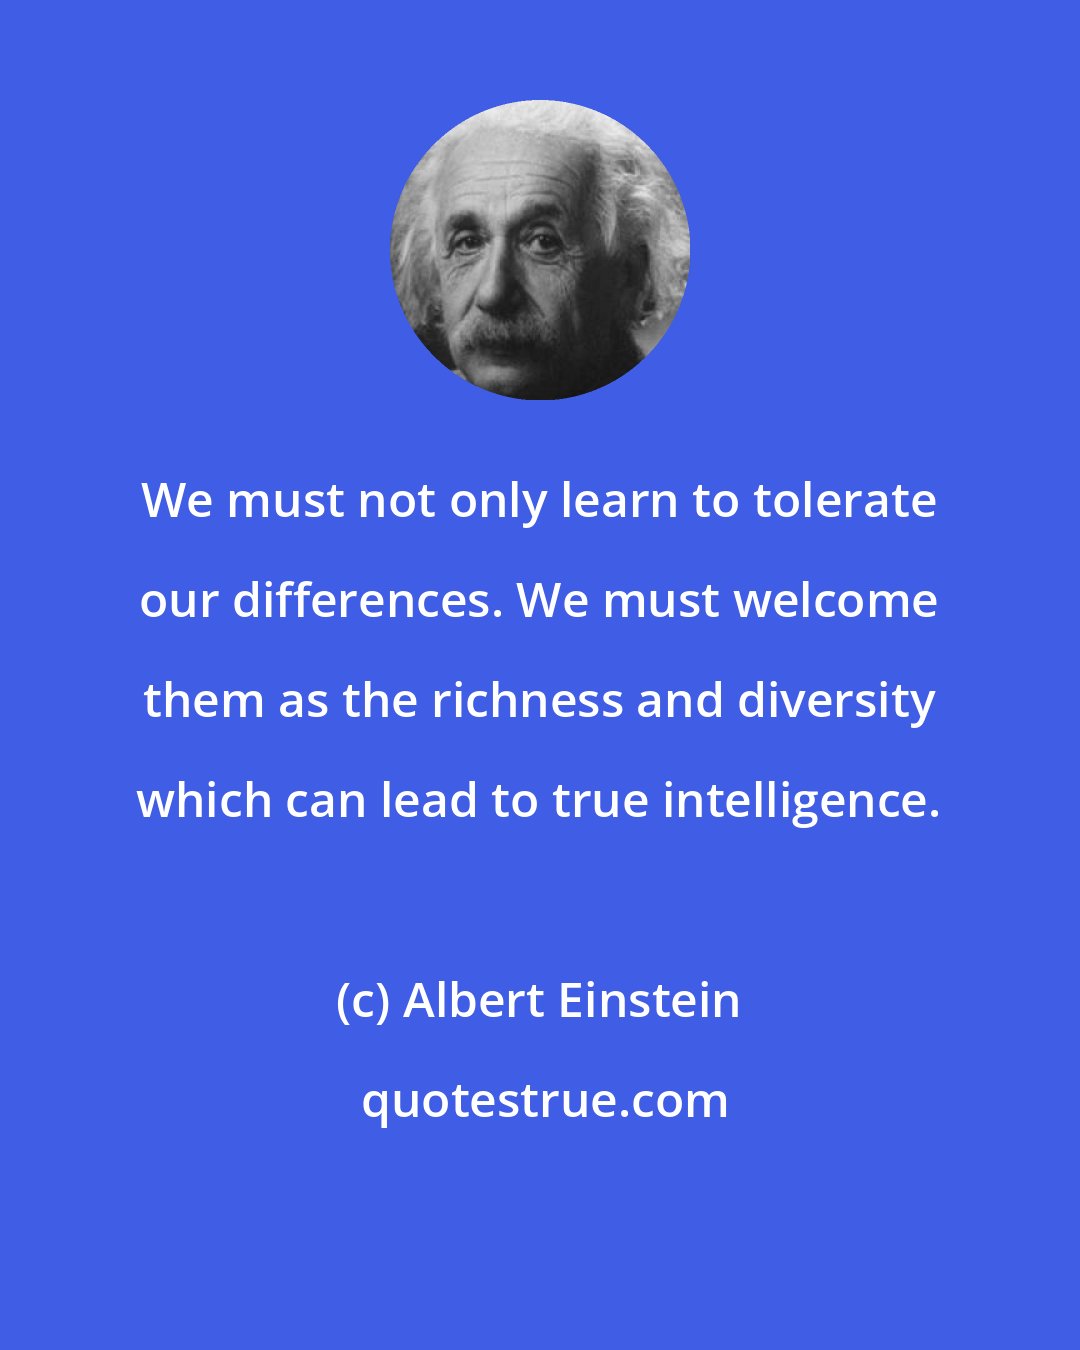 Albert Einstein: We must not only learn to tolerate our differences. We must welcome them as the richness and diversity which can lead to true intelligence.